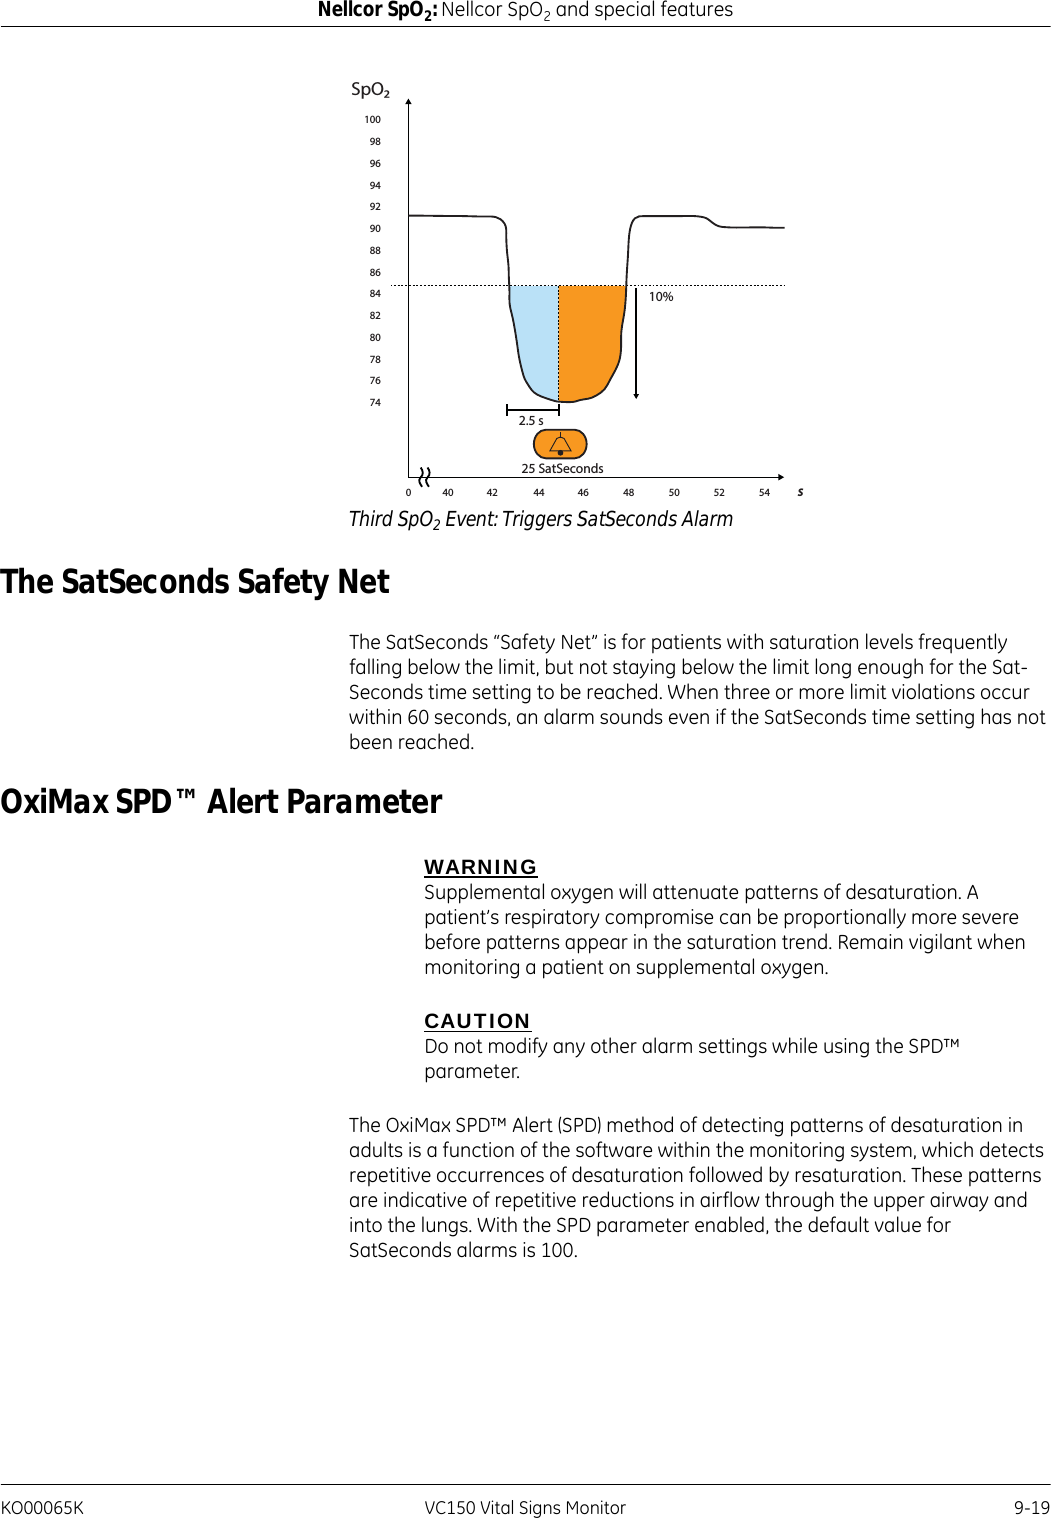 KO00065K VC150 Vital Signs Monitor 9-19Nellcor SpO2: Nellcor SpO2 and special featuresThird SpO2 Event: Triggers SatSeconds AlarmThe SatSeconds Safety NetThe SatSeconds “Safety Net” is for patients with saturation levels frequently falling below the limit, but not staying below the limit long enough for the Sat-Seconds time setting to be reached. When three or more limit violations occur within 60 seconds, an alarm sounds even if the SatSeconds time setting has not been reached.OxiMax SPD™ Alert ParameterWARNINGSupplemental oxygen will attenuate patterns of desaturation. A patient’s respiratory compromise can be proportionally more severe before patterns appear in the saturation trend. Remain vigilant when monitoring a patient on supplemental oxygen.CAUTIONDo not modify any other alarm settings while using the SPD™ parameter.The OxiMax SPD™ Alert (SPD) method of detecting patterns of desaturation in adults is a function of the software within the monitoring system, which detects repetitive occurrences of desaturation followed by resaturation. These patterns are indicative of repetitive reductions in airflow through the upper airway and into the lungs. With the SPD parameter enabled, the default value for SatSeconds alarms is 100.2.5 s25 SatSeconds0 40  42 44 46 48 S10098969492908886848280787674SpO10%50 52 54